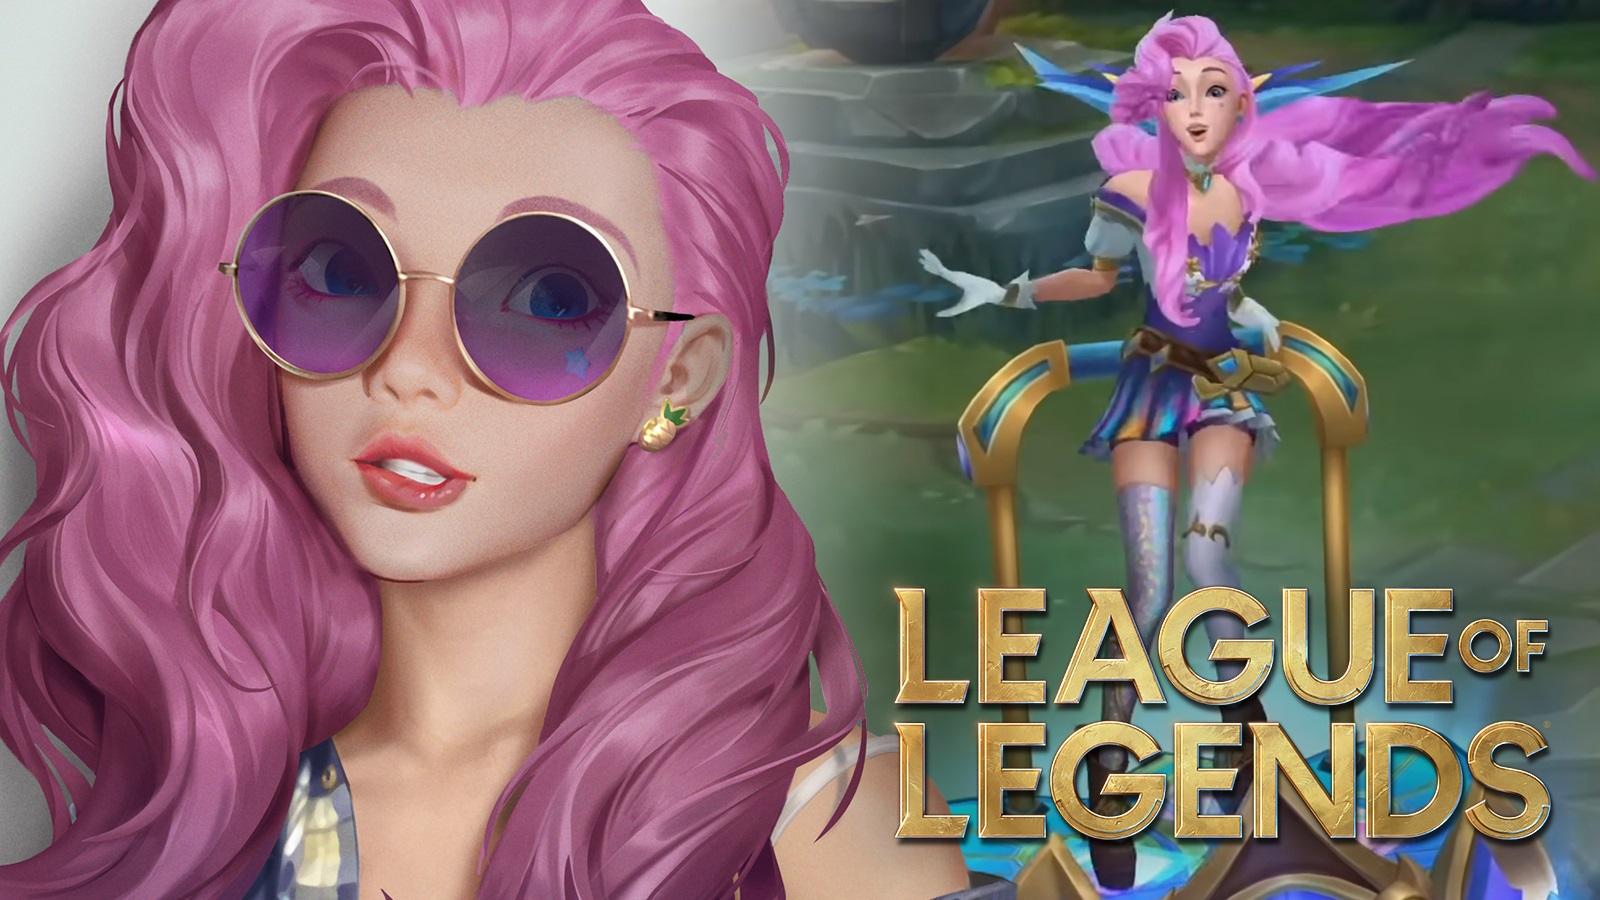 Seraphine selfie in front of in-game League of Legends model.